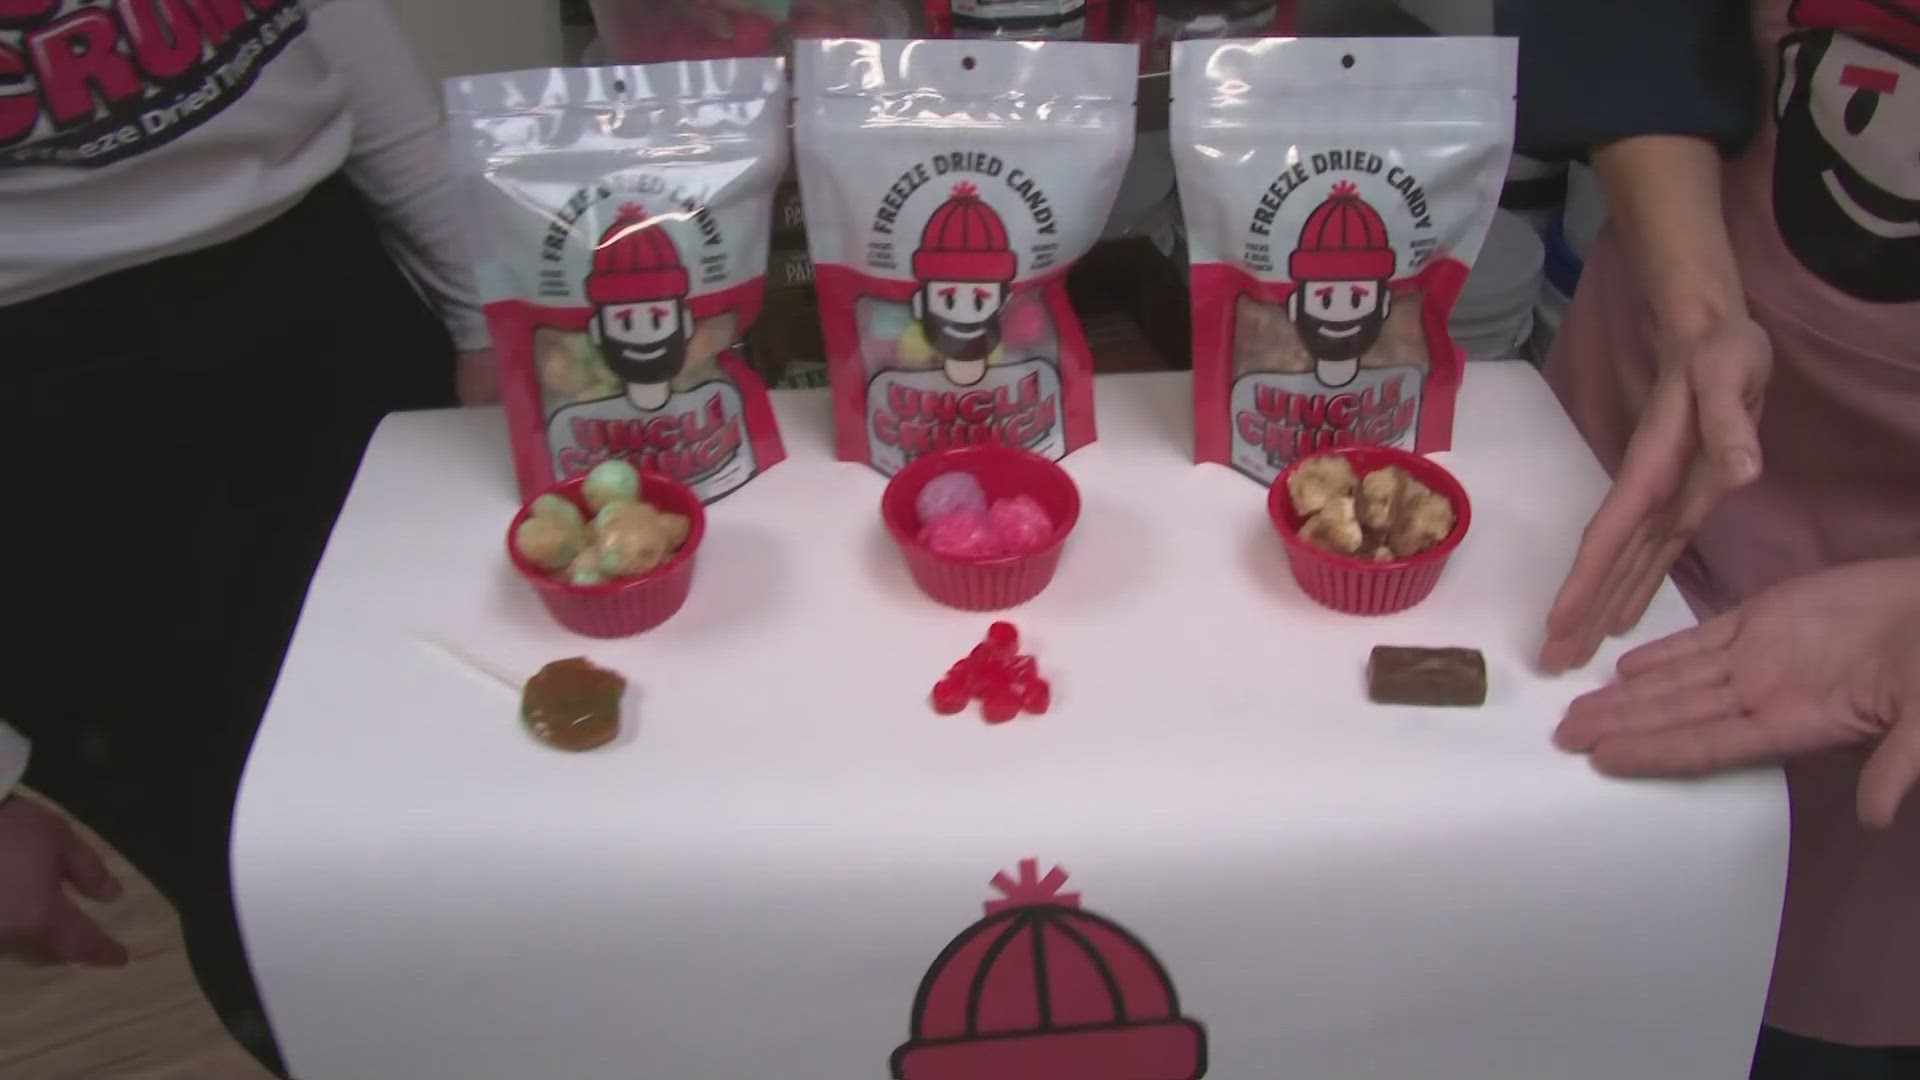 Air Heads and Nerd Rope are a few sweet treats so many of us grew up on.  Now, a local woman is putting a new twist on them with her freeze-dried candy business.